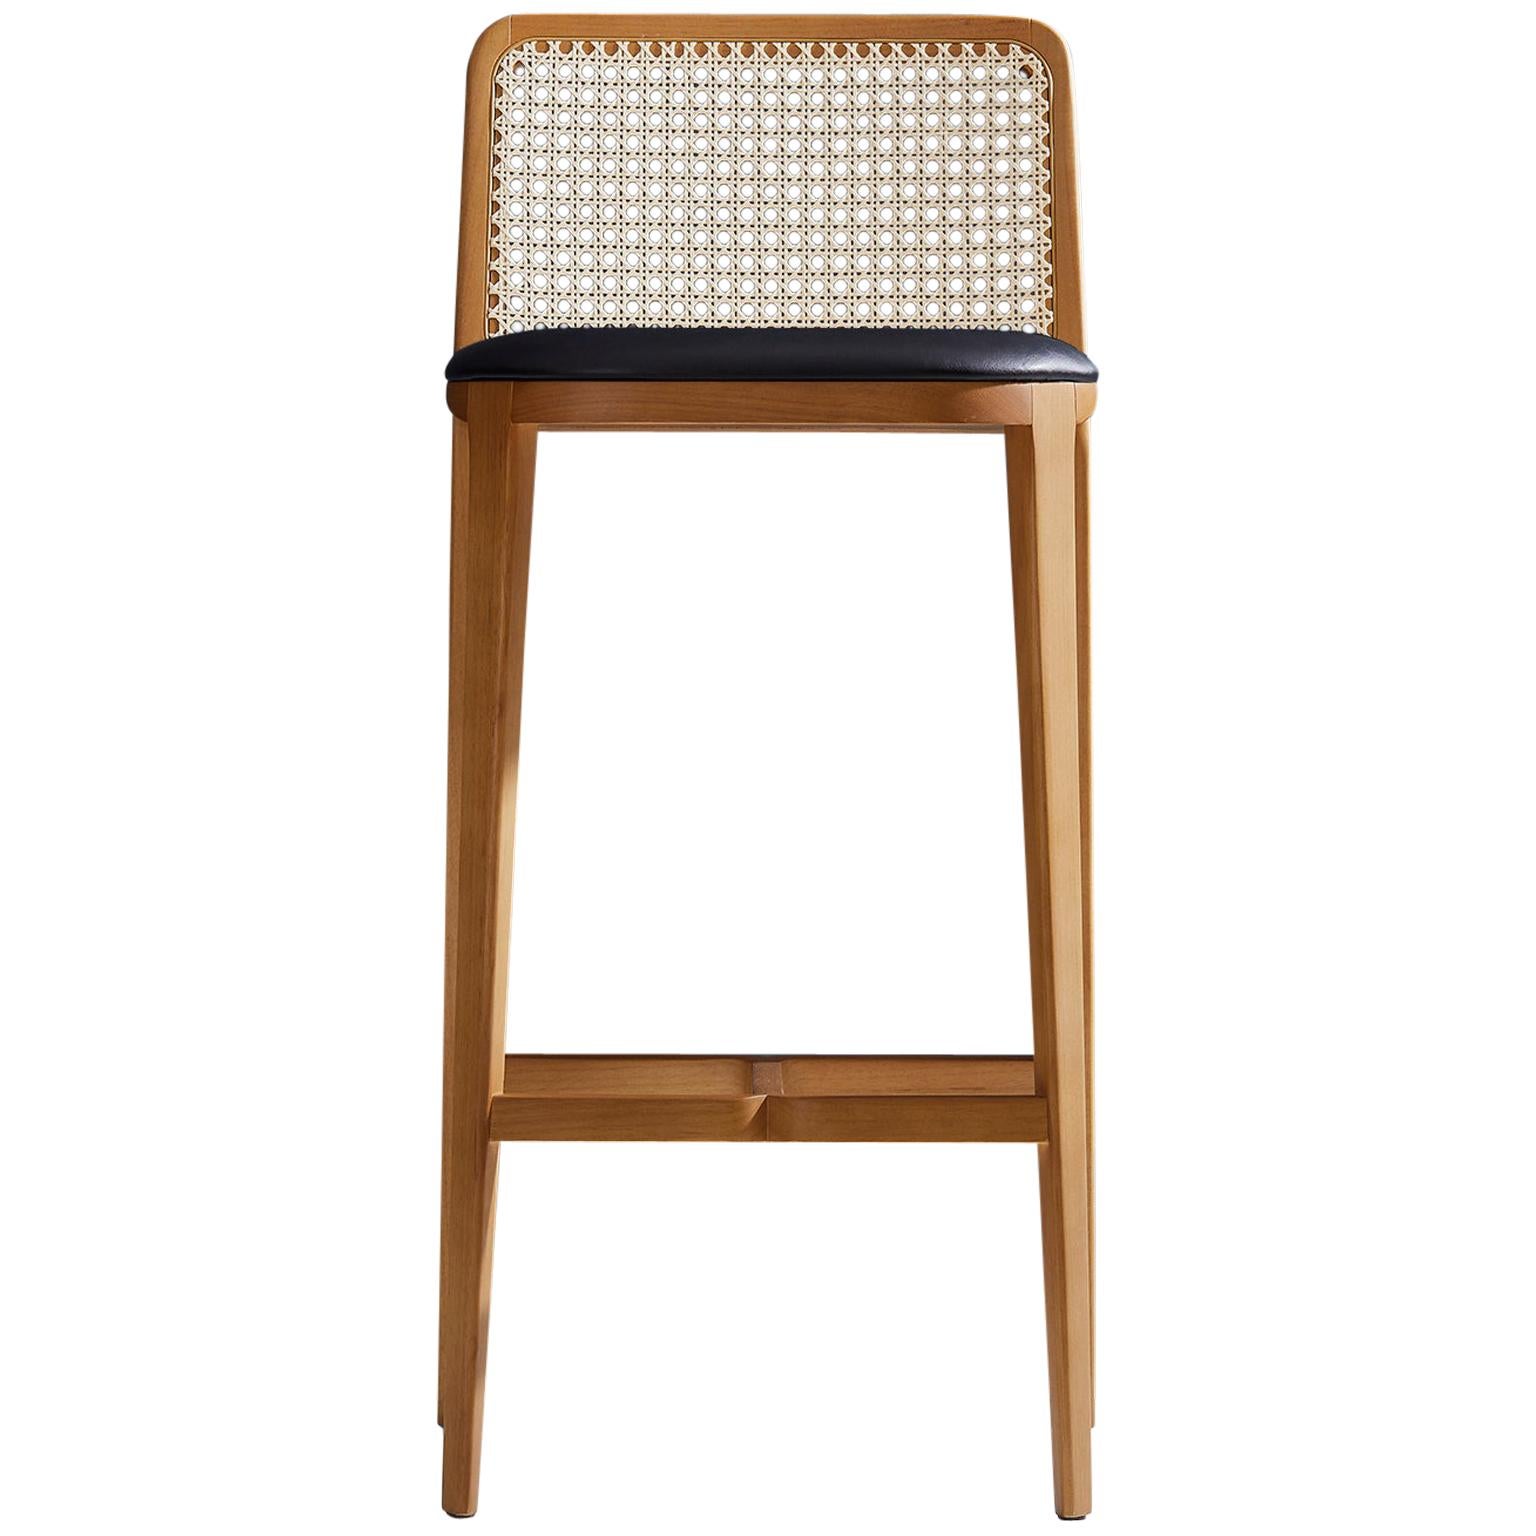 Minimal Style, Solid Wood Stool, Bar or Counter Hight, Caning and Leather For Sale